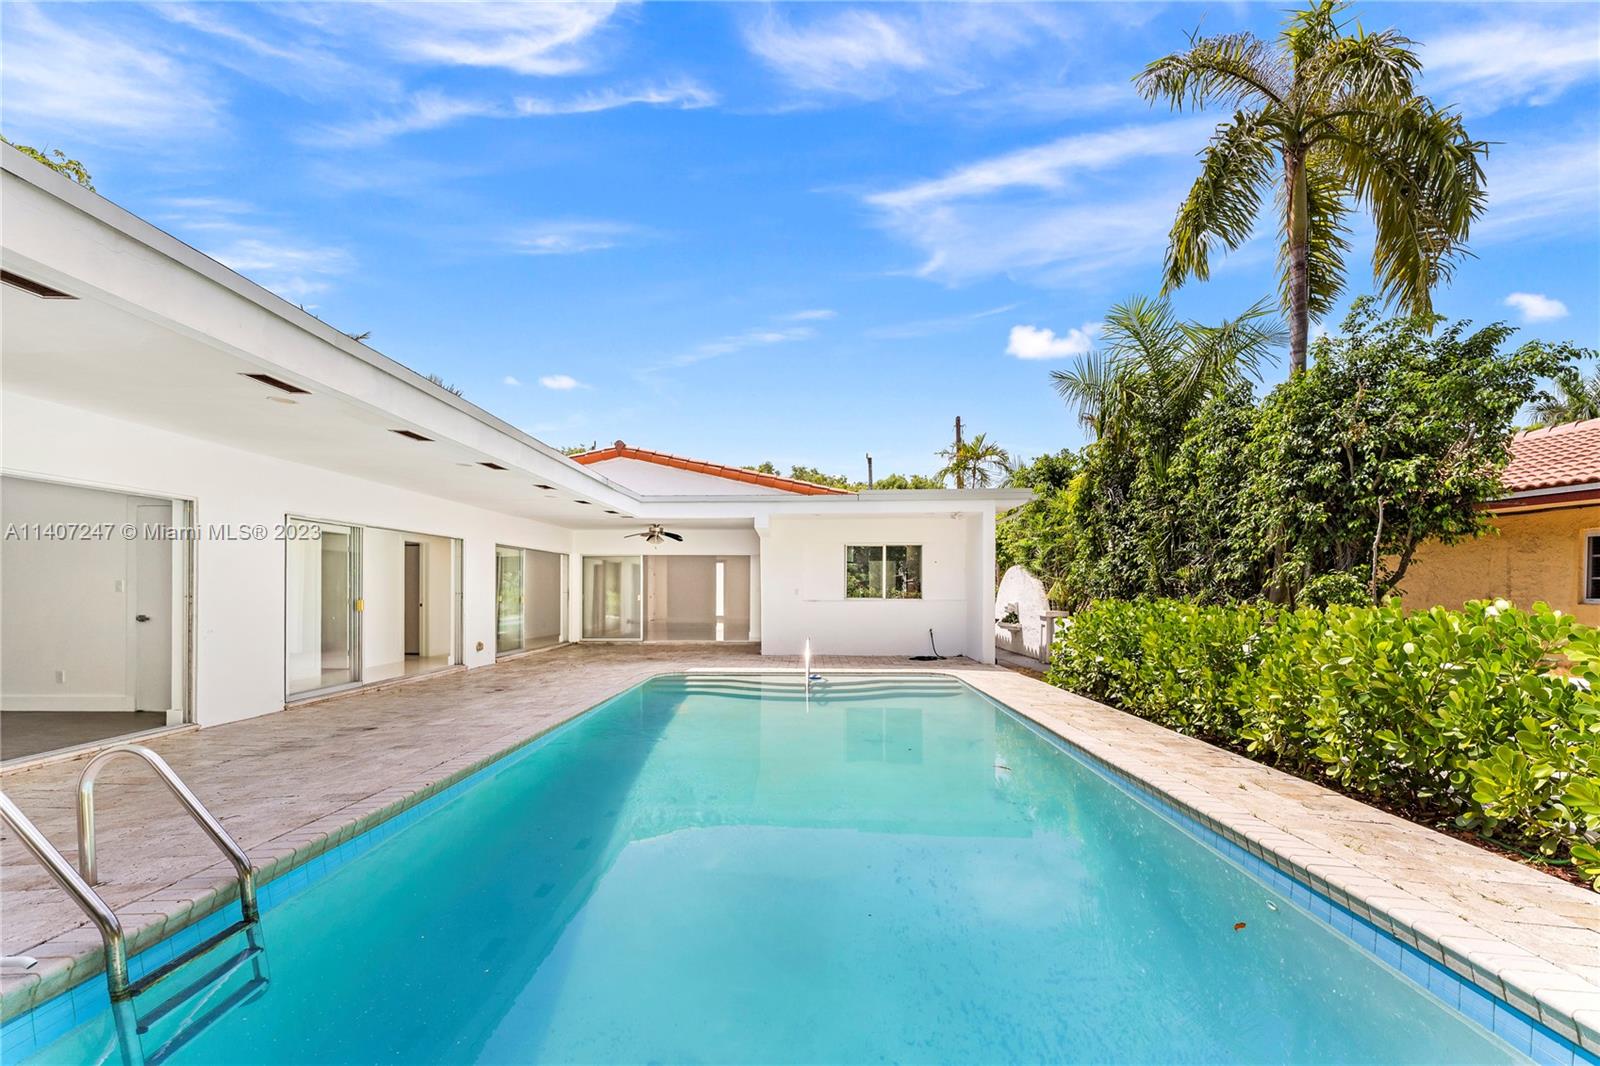 DRIVE IN/OUT ONTO THE ONLY SECLUDED BLOCK ON ALTON WITH NO BUSY TRAFFIC. ACCESS FROM W 29TH STREET & OLD ALTON RD, RUNS PARALLEL TO LOWER NORTH BAY RD, ACROSS FROM MIAMI BEACH GOLF CLUB. RENOVATED, CHARMING, & SPACIOUS 3,123 SF ON A 7,893 SF LOT. 4 BED, 3 BATH, SWIMMING POOL WITH EXPANSIVE, BOTH COVERED & OPEN, PATIO WITH EXCELLENT OPPORTUNITY FOR INDOOR/OUTDOOR LIVING, OUTDOOR SHOWER, 1 CAR GARAGE, FAMILY RM, FORMAL DINING RM, KOSHER KITCHEN, ENORMOUS MASTER SUITE WITH WALK IN CLOSET & DIRECT ACCESS TO POOL & PATIO. LOCATED IN HIGHLY SOUGHT AFTER MIAMI BEACH, SUNSET LAKE SUBDIVISION WITH EXCELLENT WALKING SCORE IN CLOSE PROXIMITY TO SUNSET HARBOR, LINCOLN RD, 1-95, 41ST STREET, VENETIAN CAUSEWAY, HOSPITAL, HOUSES OF WORSHIP, GRADE A PUBLIC SCHOOLS, GOLF, TENNIS, PARKS, & DOG PARKS